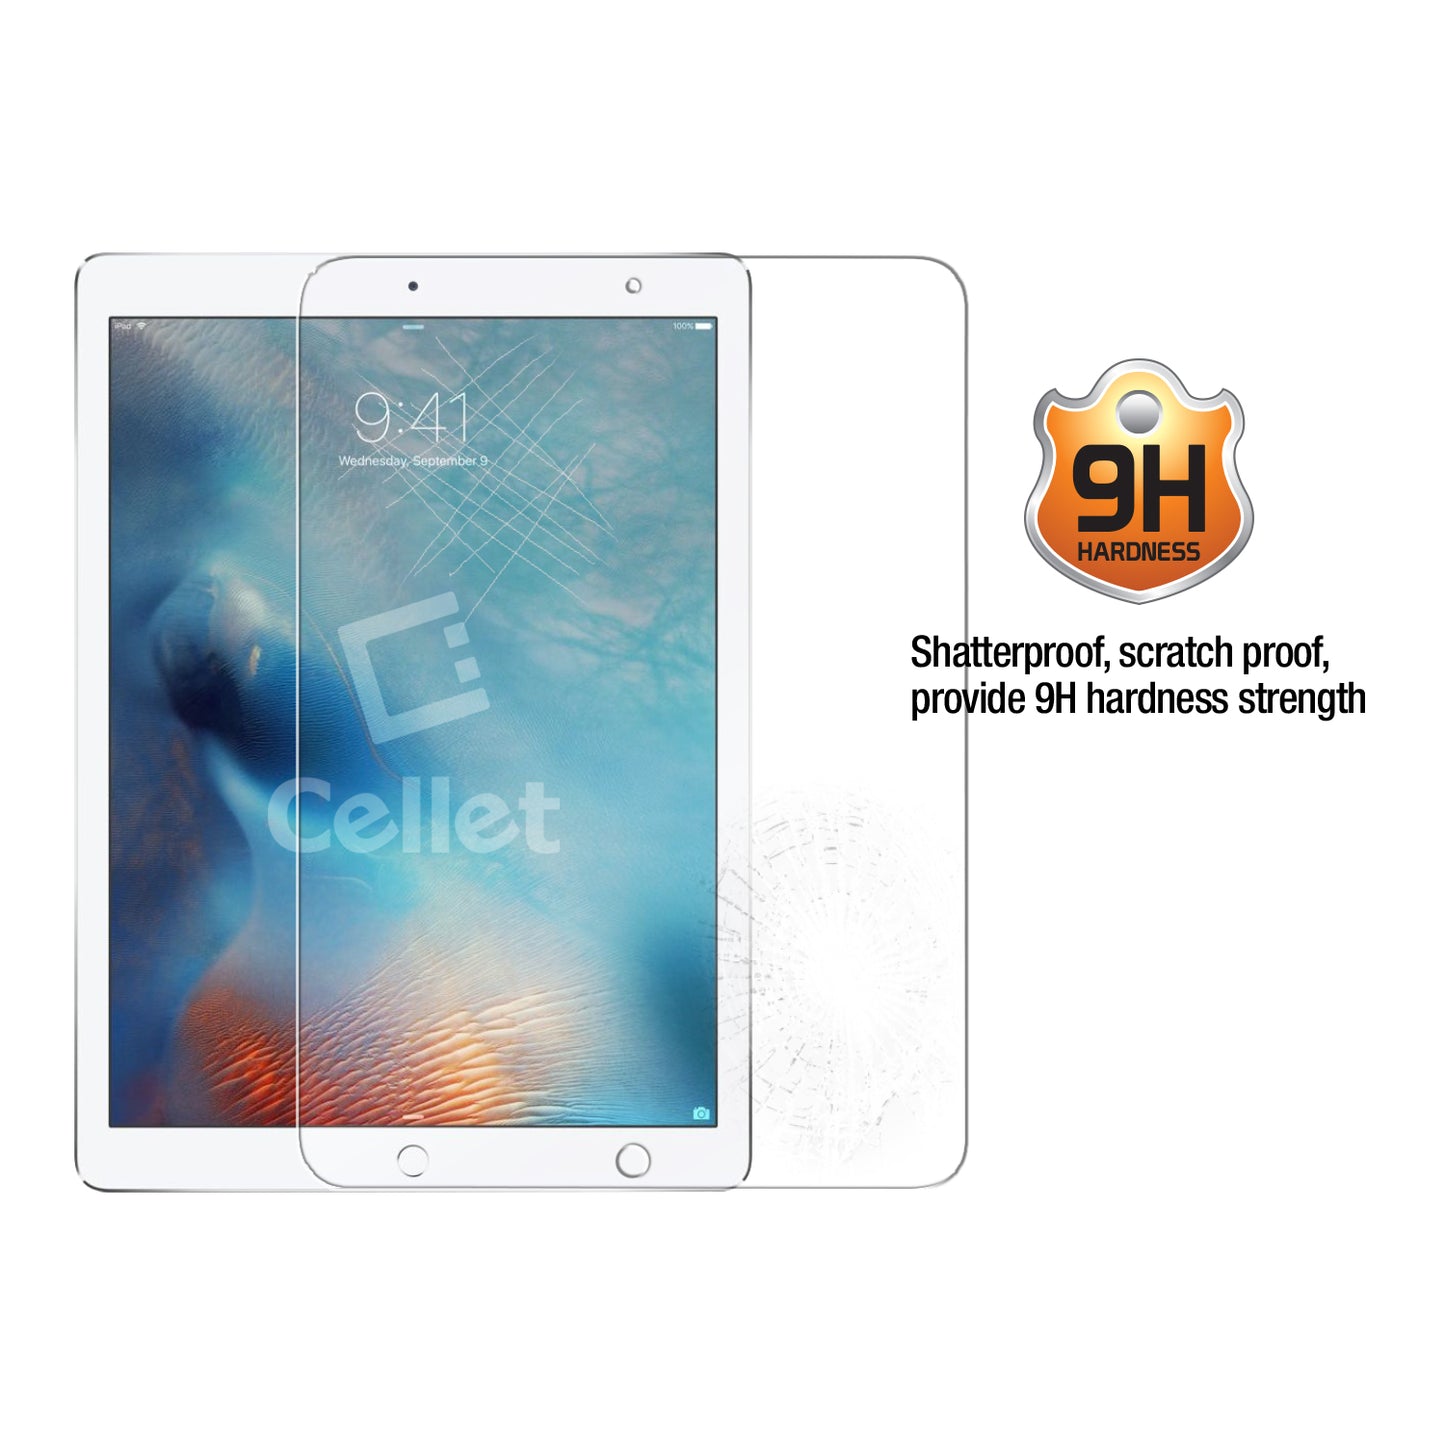 SGIPHPRO129 - Cellet iPad Pro 12.9-inch Tempered Glass Screen Protector (2017), Cellet 0.3mm Premium Tempered Glass Screen Protector